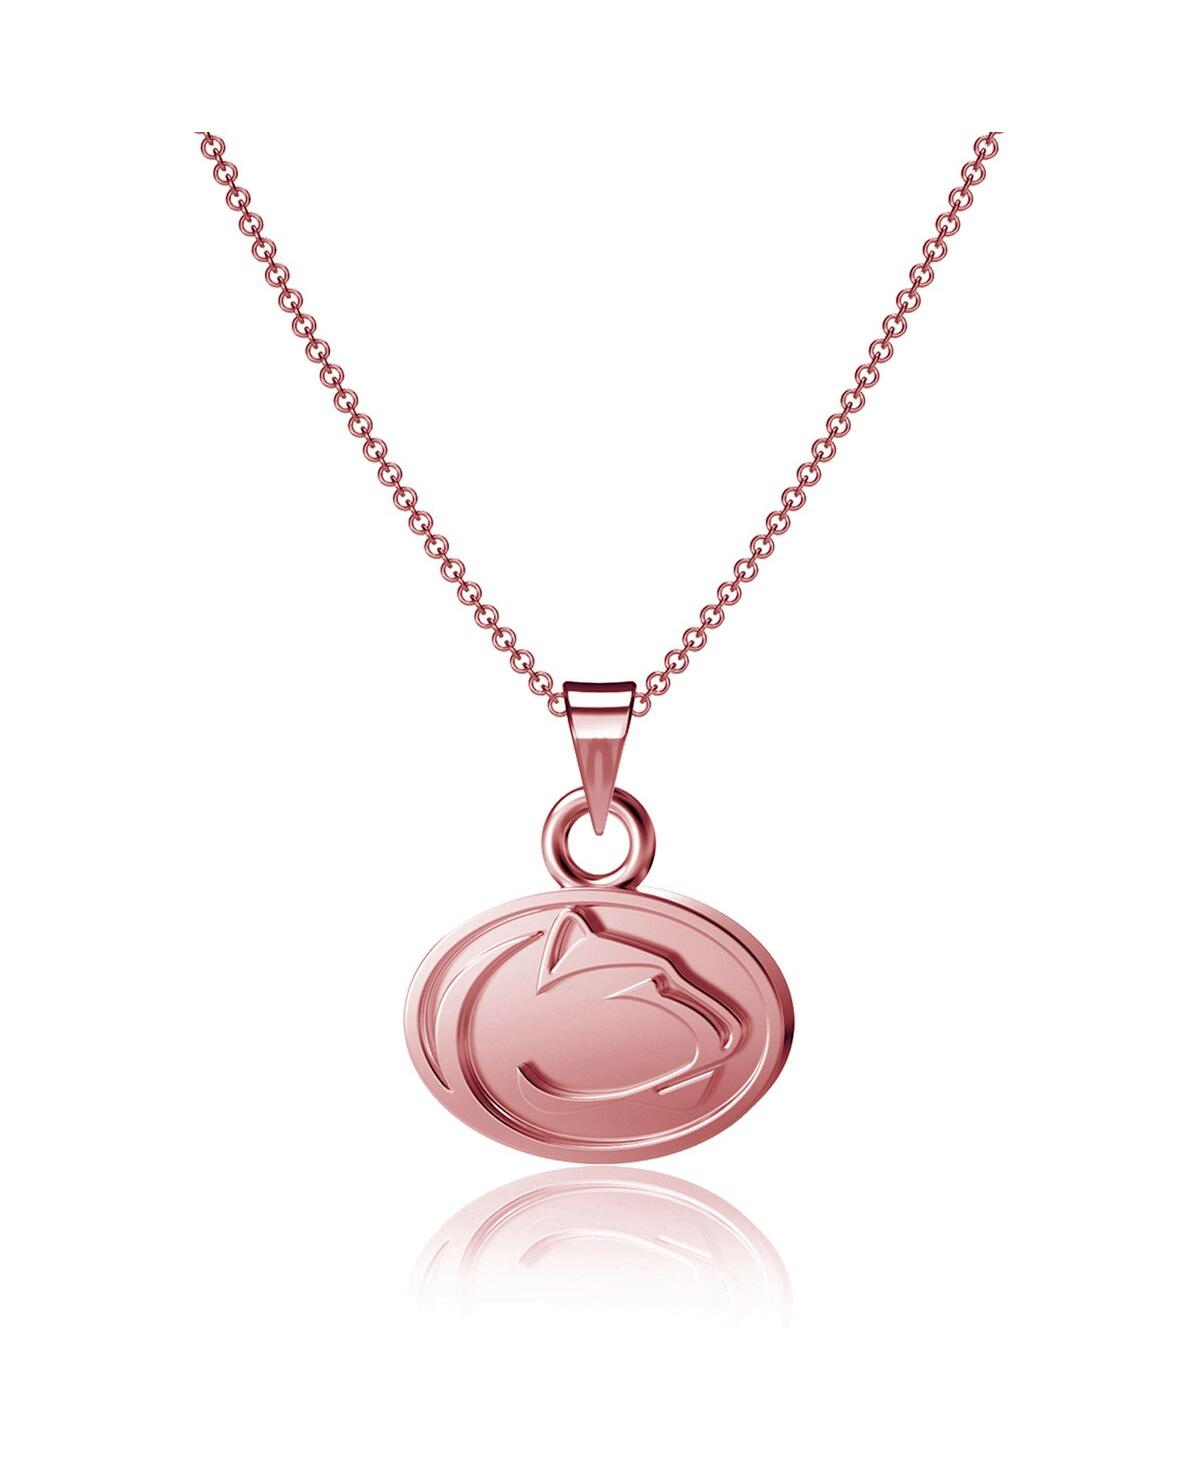 Women's Dayna Designs Penn State Nittany Lions Rose Gold Pendant Necklace - Pink